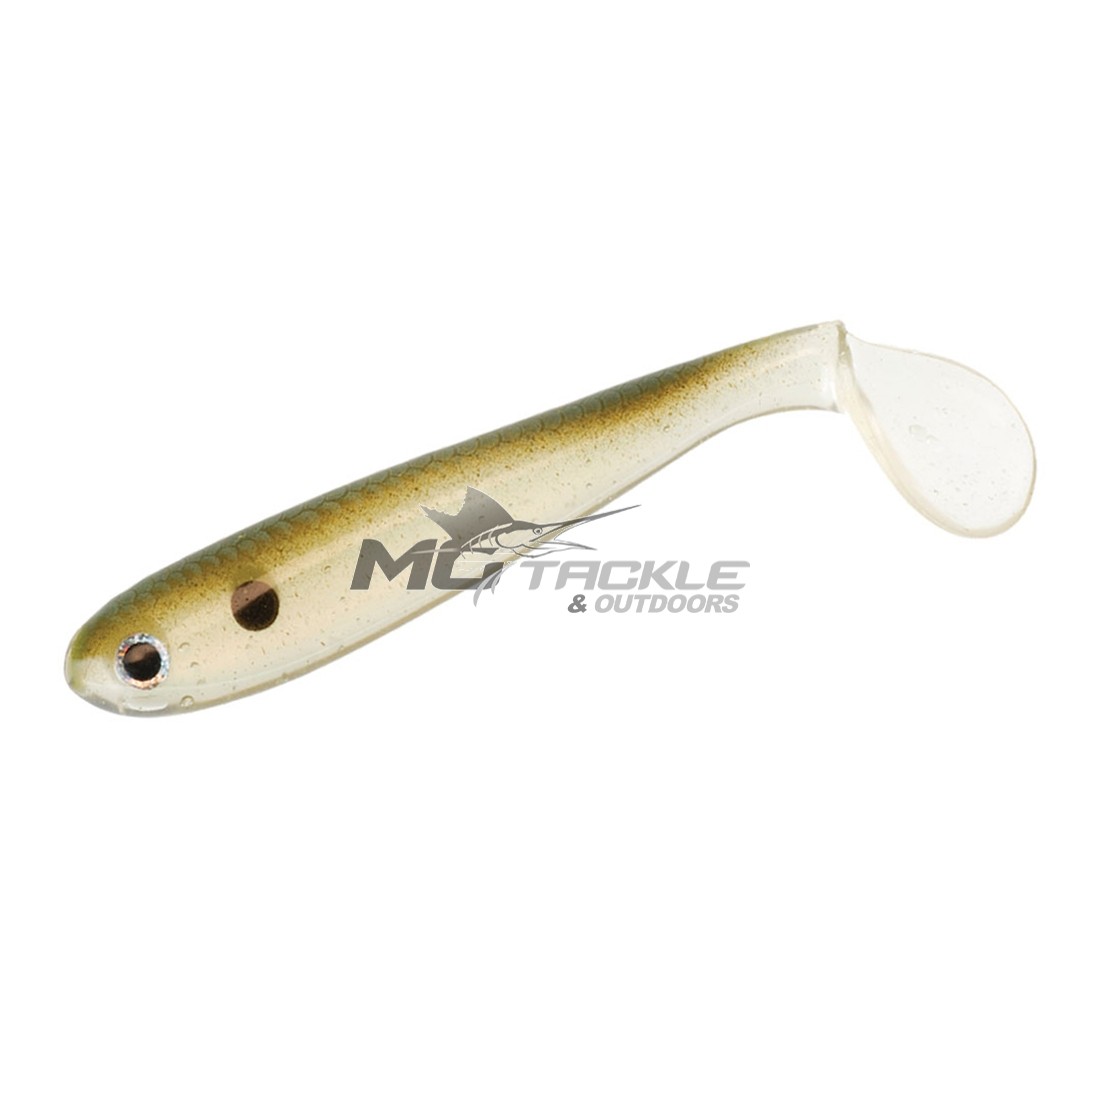 Closer Look at the Berkley Powerbait Shad Soft Plastic Pre-Rigged